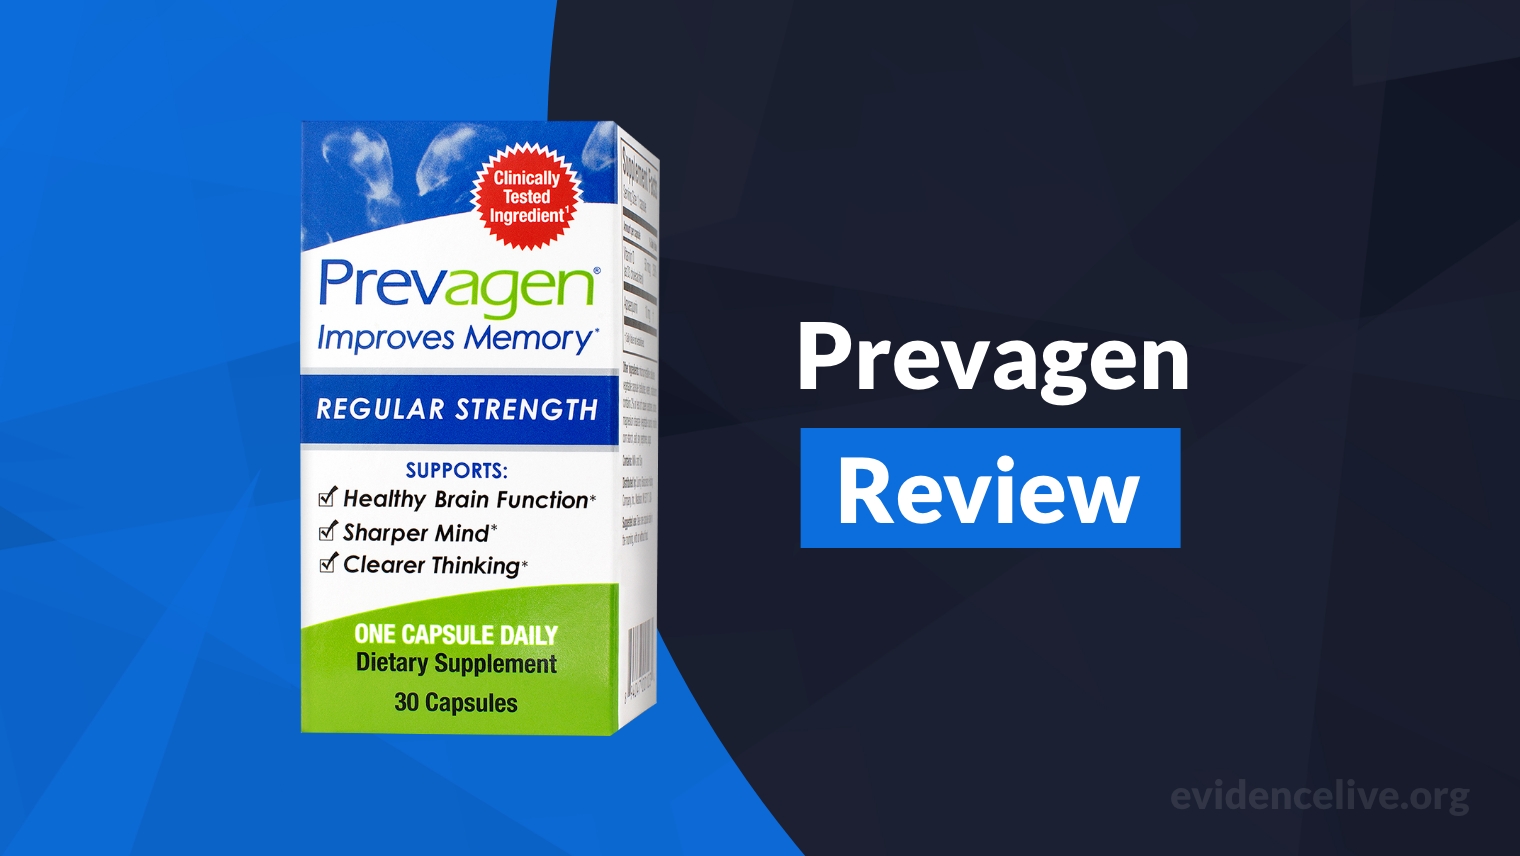 Prevagen Review: Ingredients, Benefits, and Side Effects